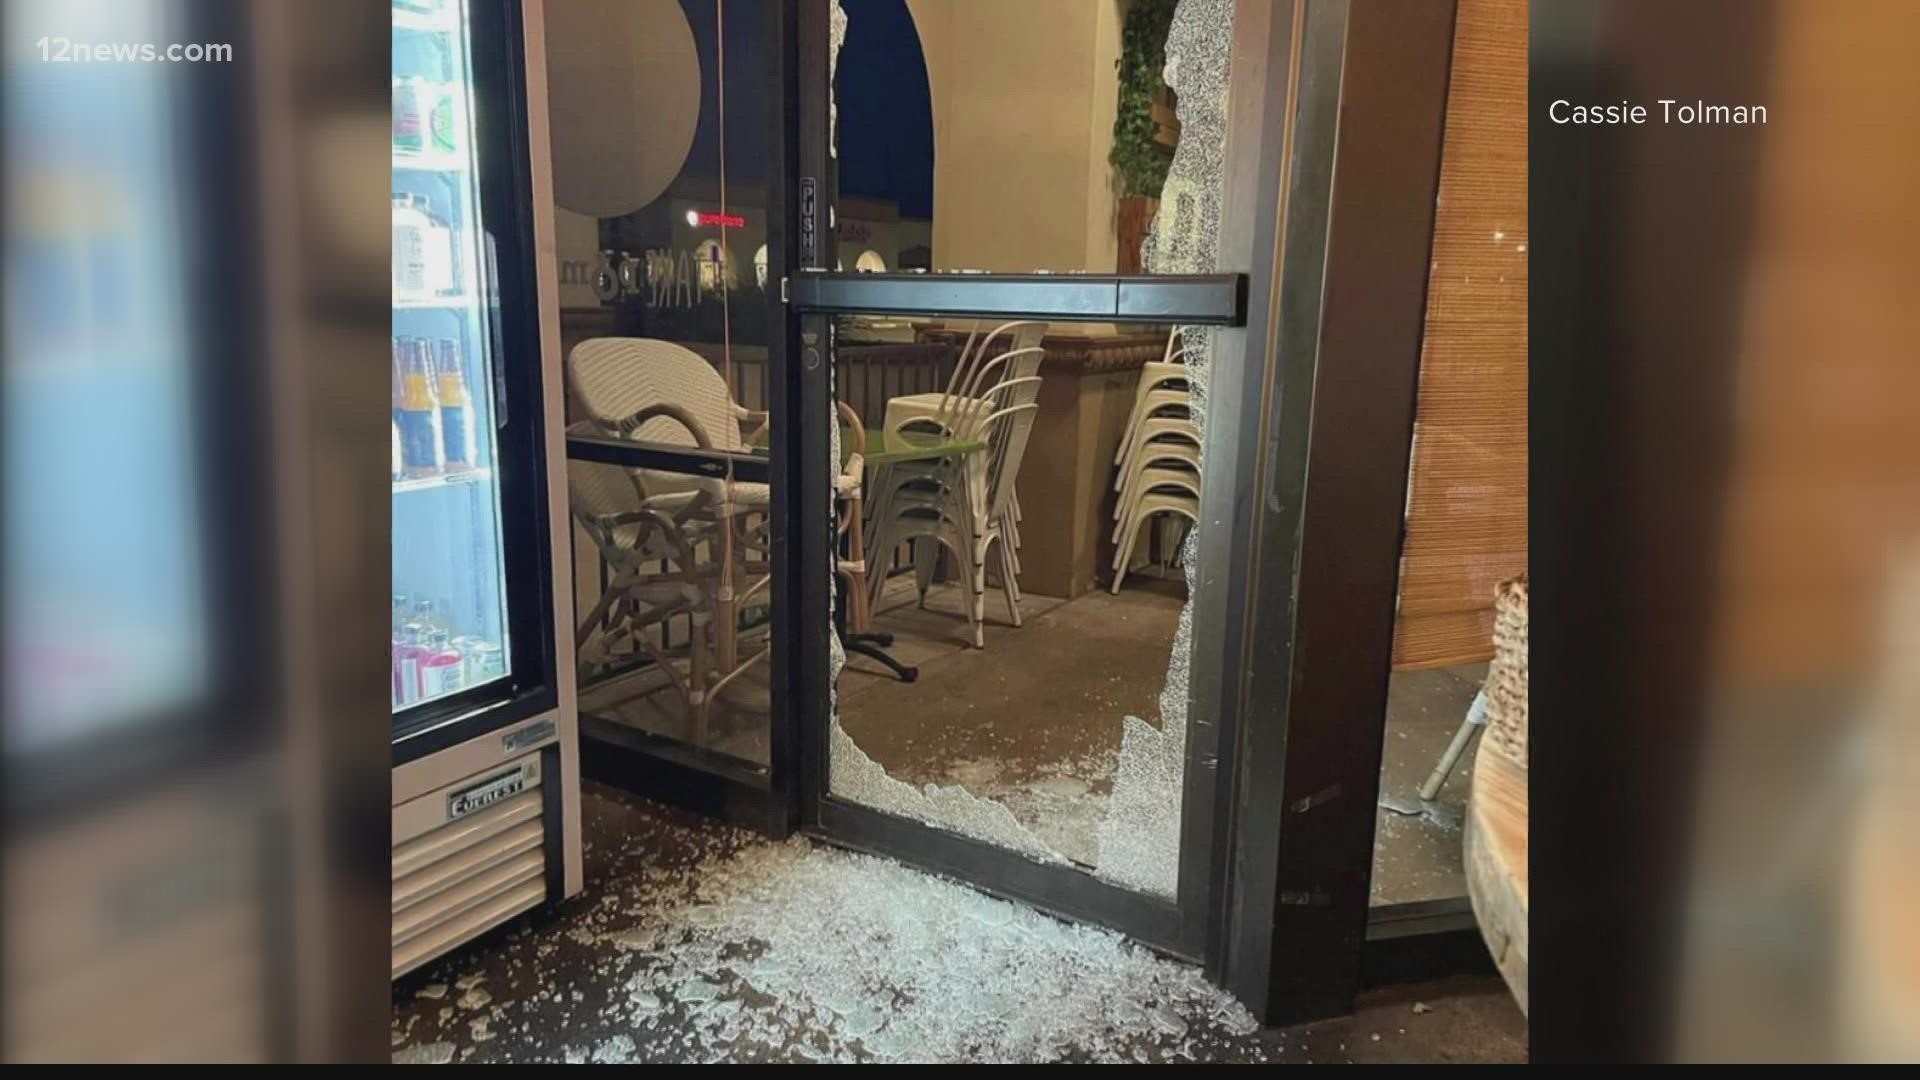 For the second time this year, a small business located in an Ahwatukee shopping plaza has been burglarized.